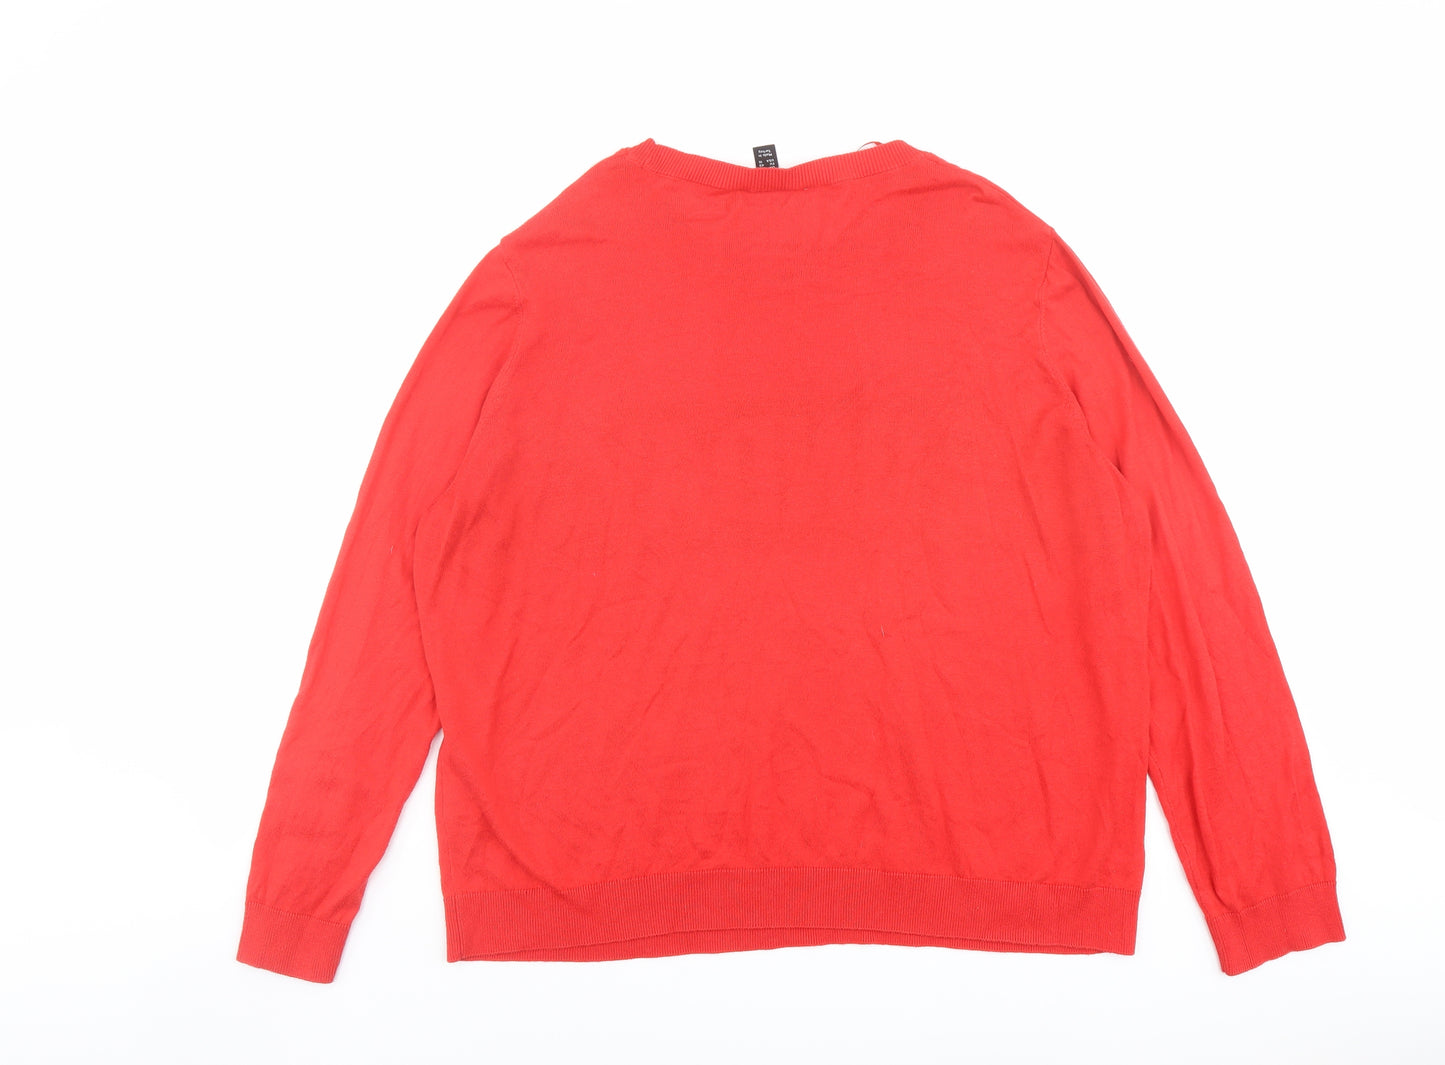 New Look Womens Red Round Neck Acrylic Pullover Jumper Size 20 - Funday